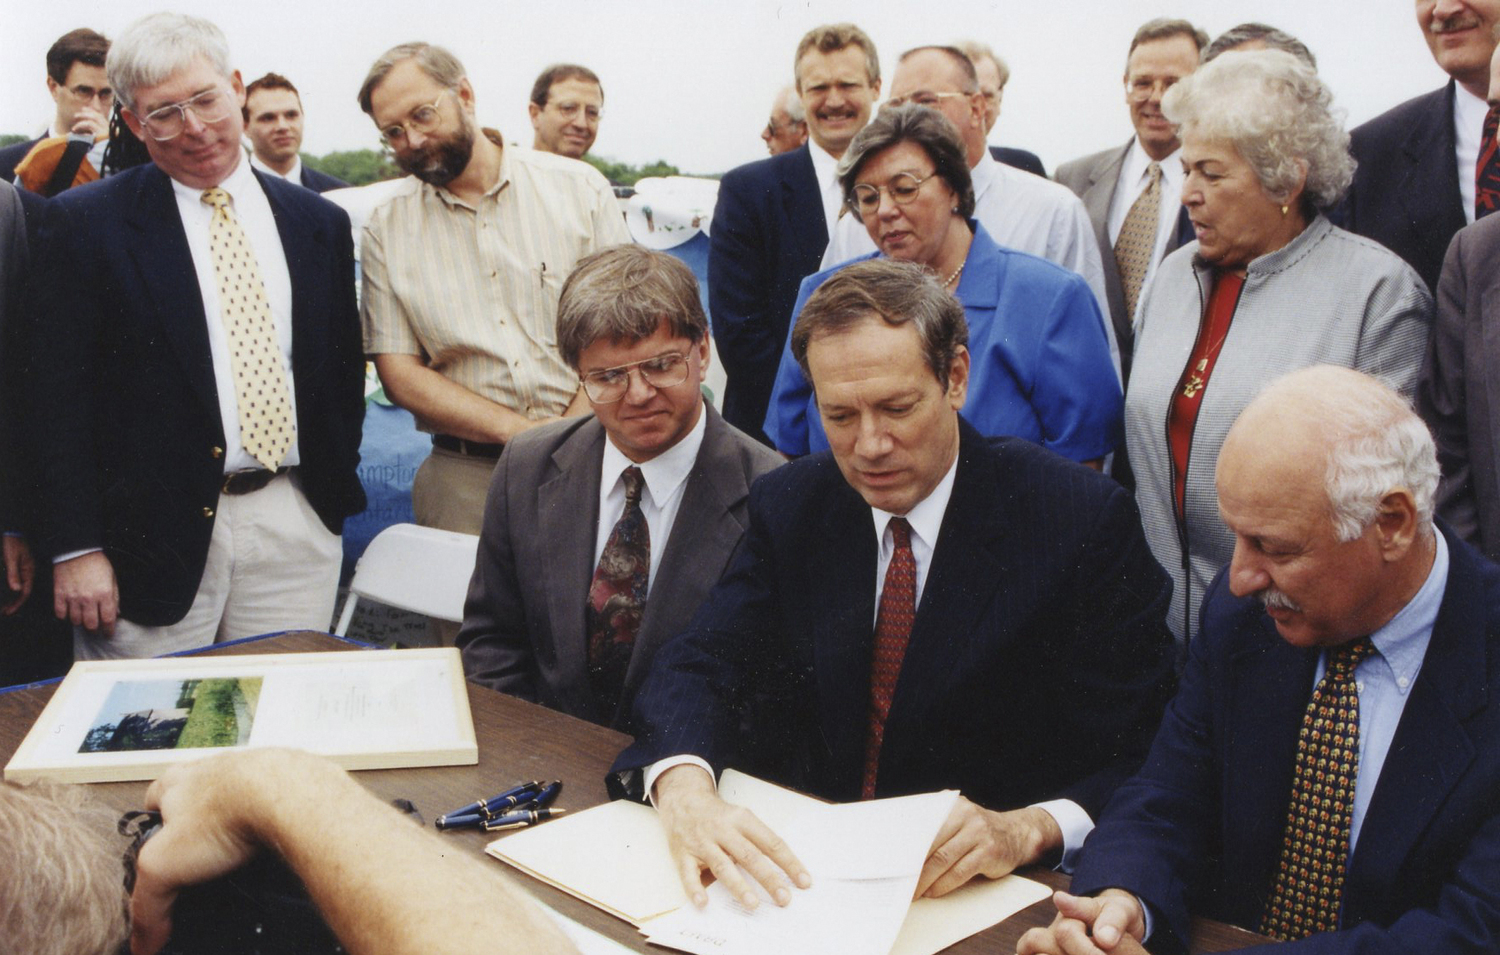 John v.H. Halsey, standing, second from left, at the signing of the Community Preservation Fund legislation in 1998.   COURTESY PECONIC LAND TRUST